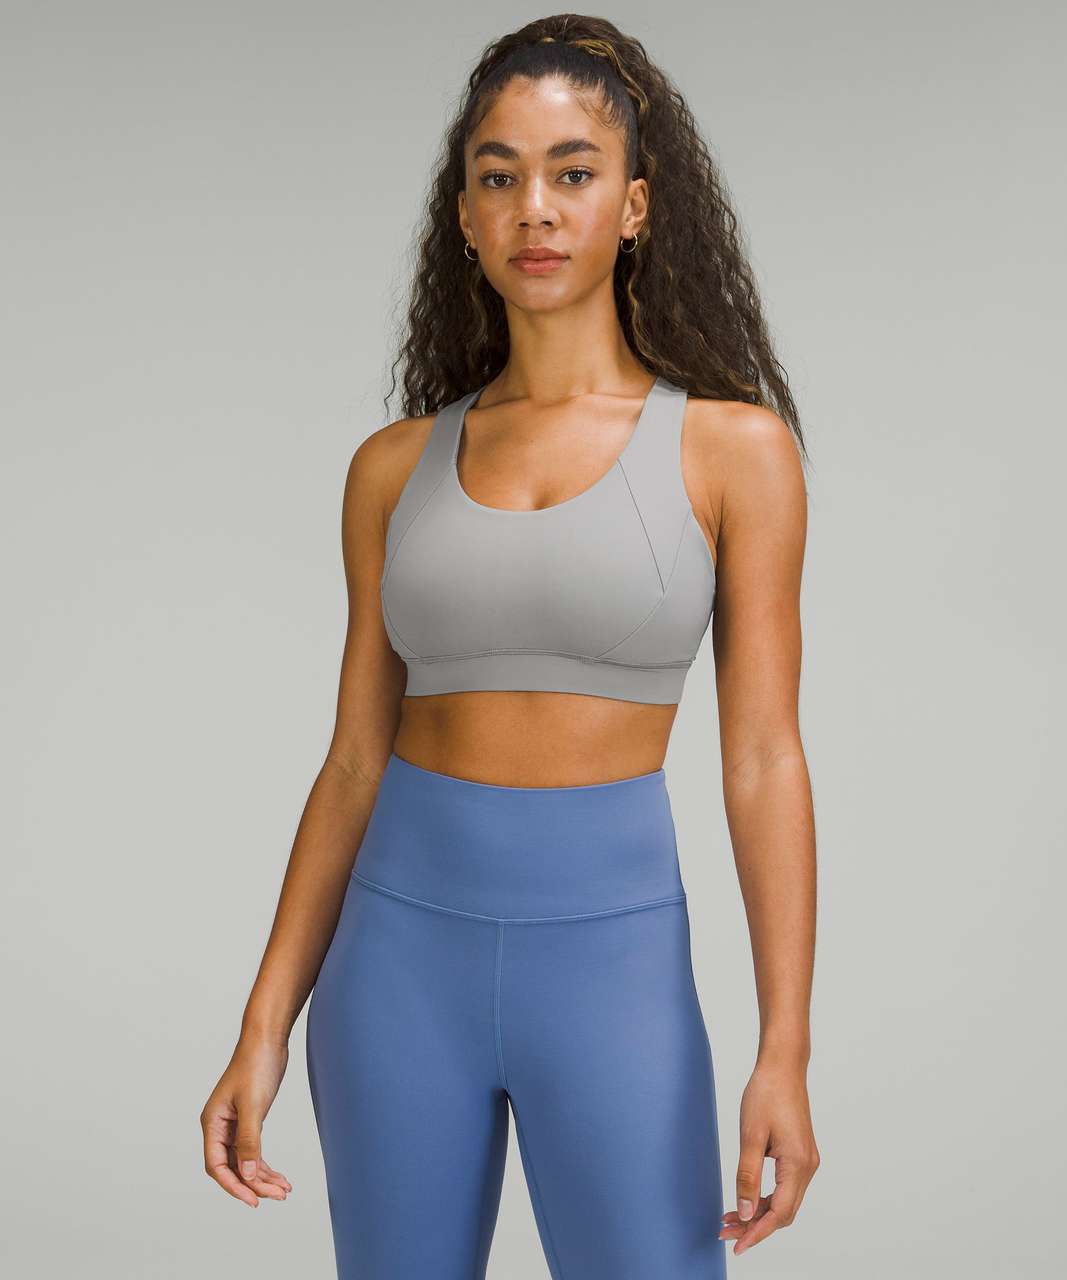 Lululemon Free to Be Elevated Bra *Light Support, DD/DDD(E) Cup - Gull